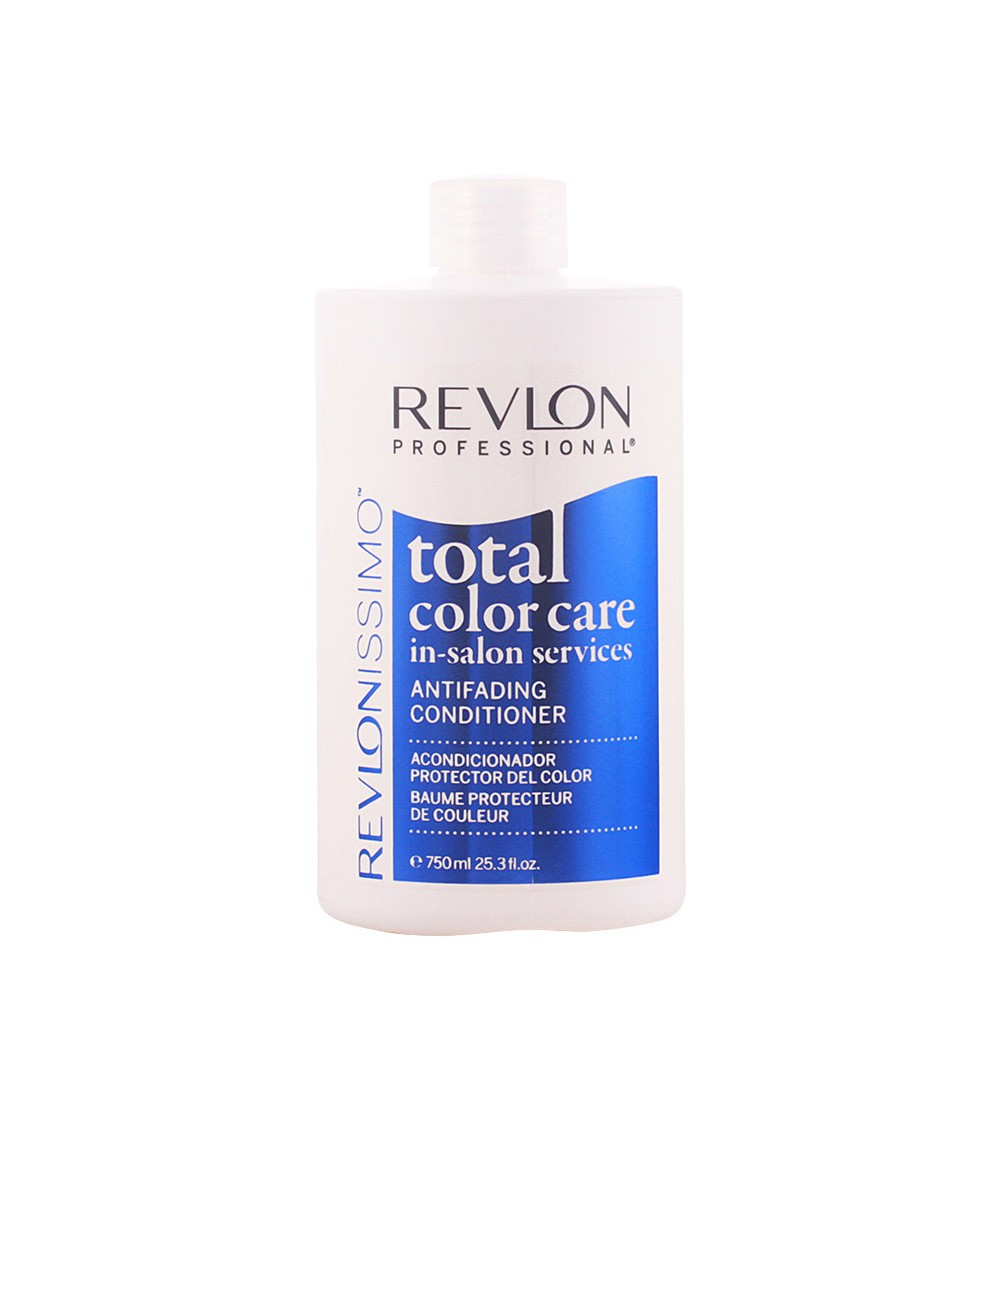 TOTAL COLOR CARE antifading conditioner 750 ml